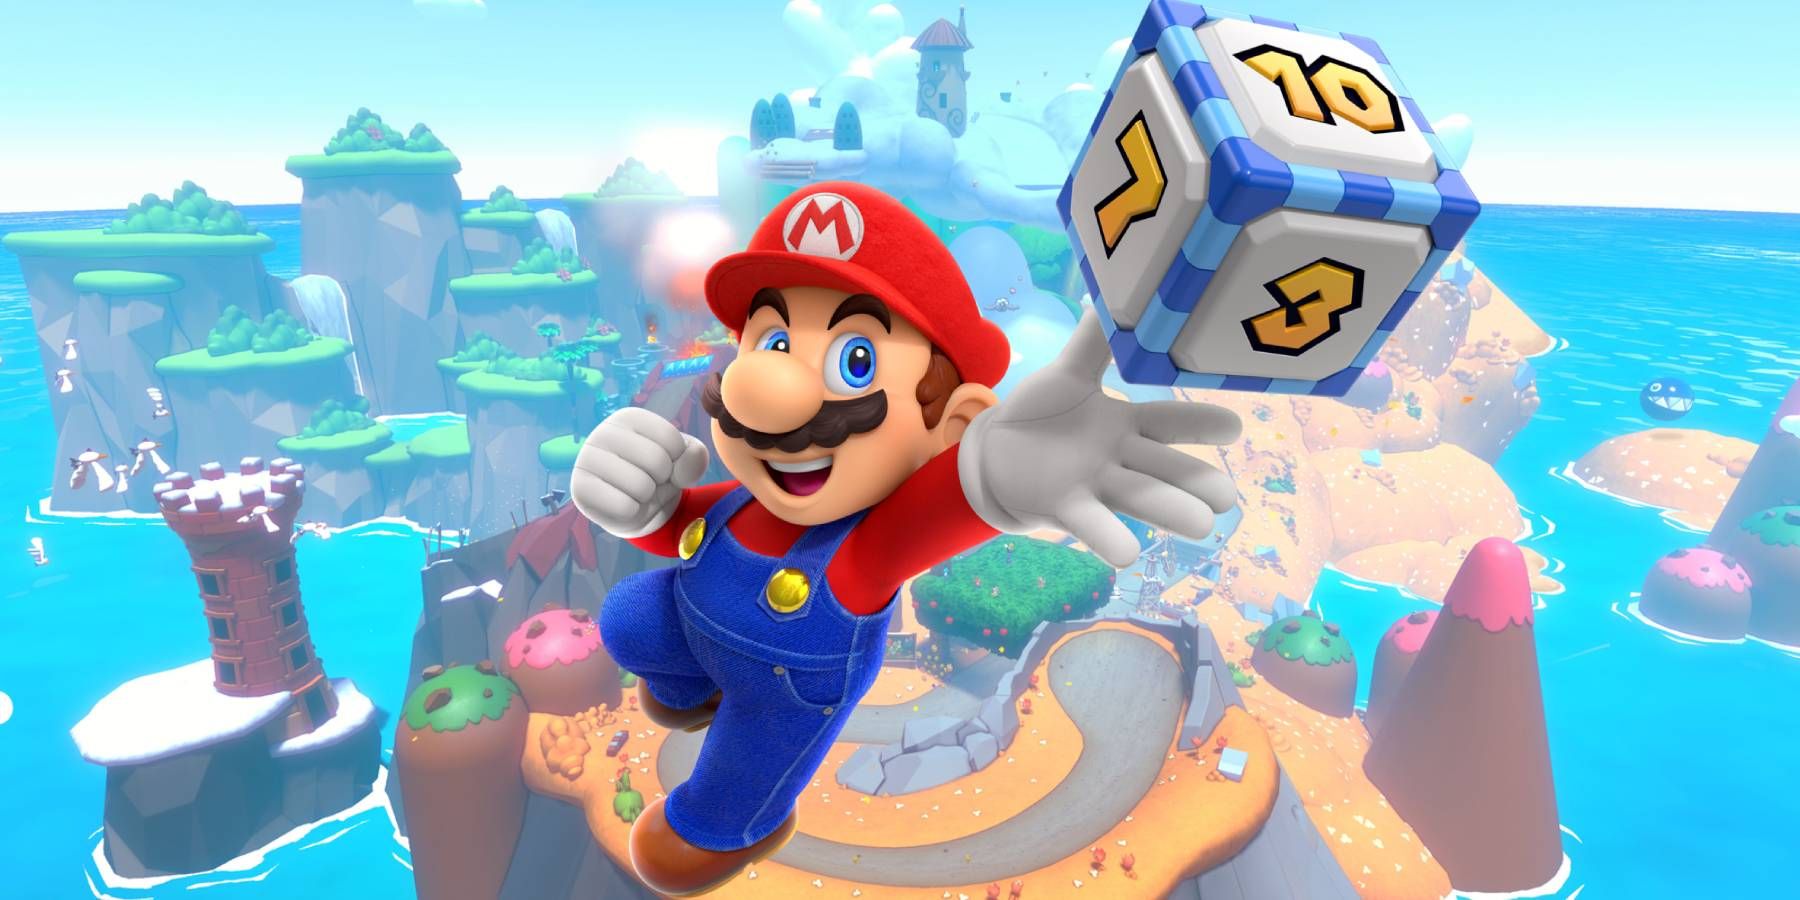 Mario with a dice block at Yoshi's Island from Mario Kart 8 Deluxe